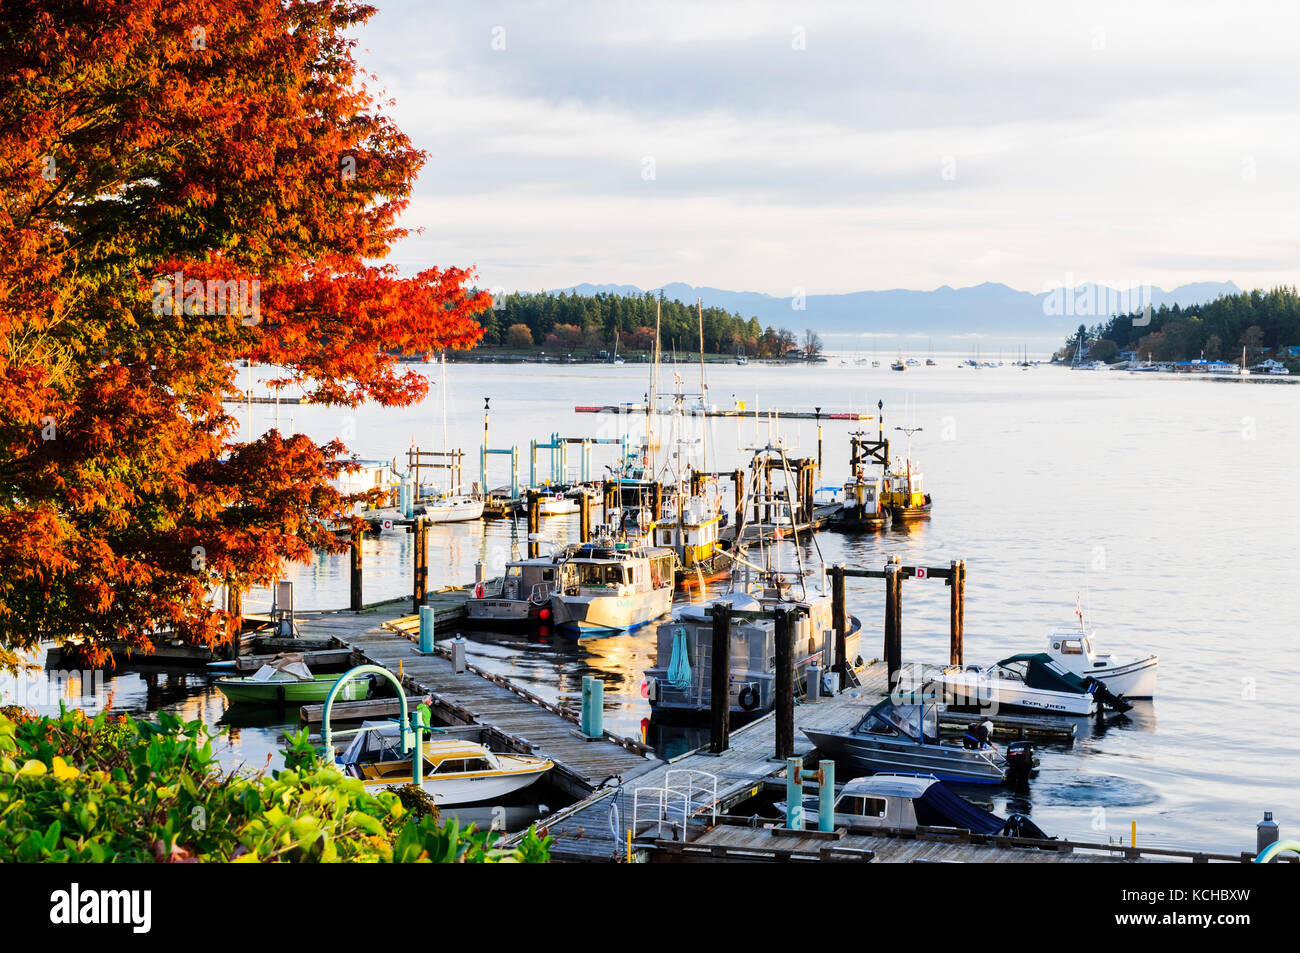 The Nanaimo harbour with pleasure boats and fishing vessels in Nanaimo, British Columbia. Stock Photo